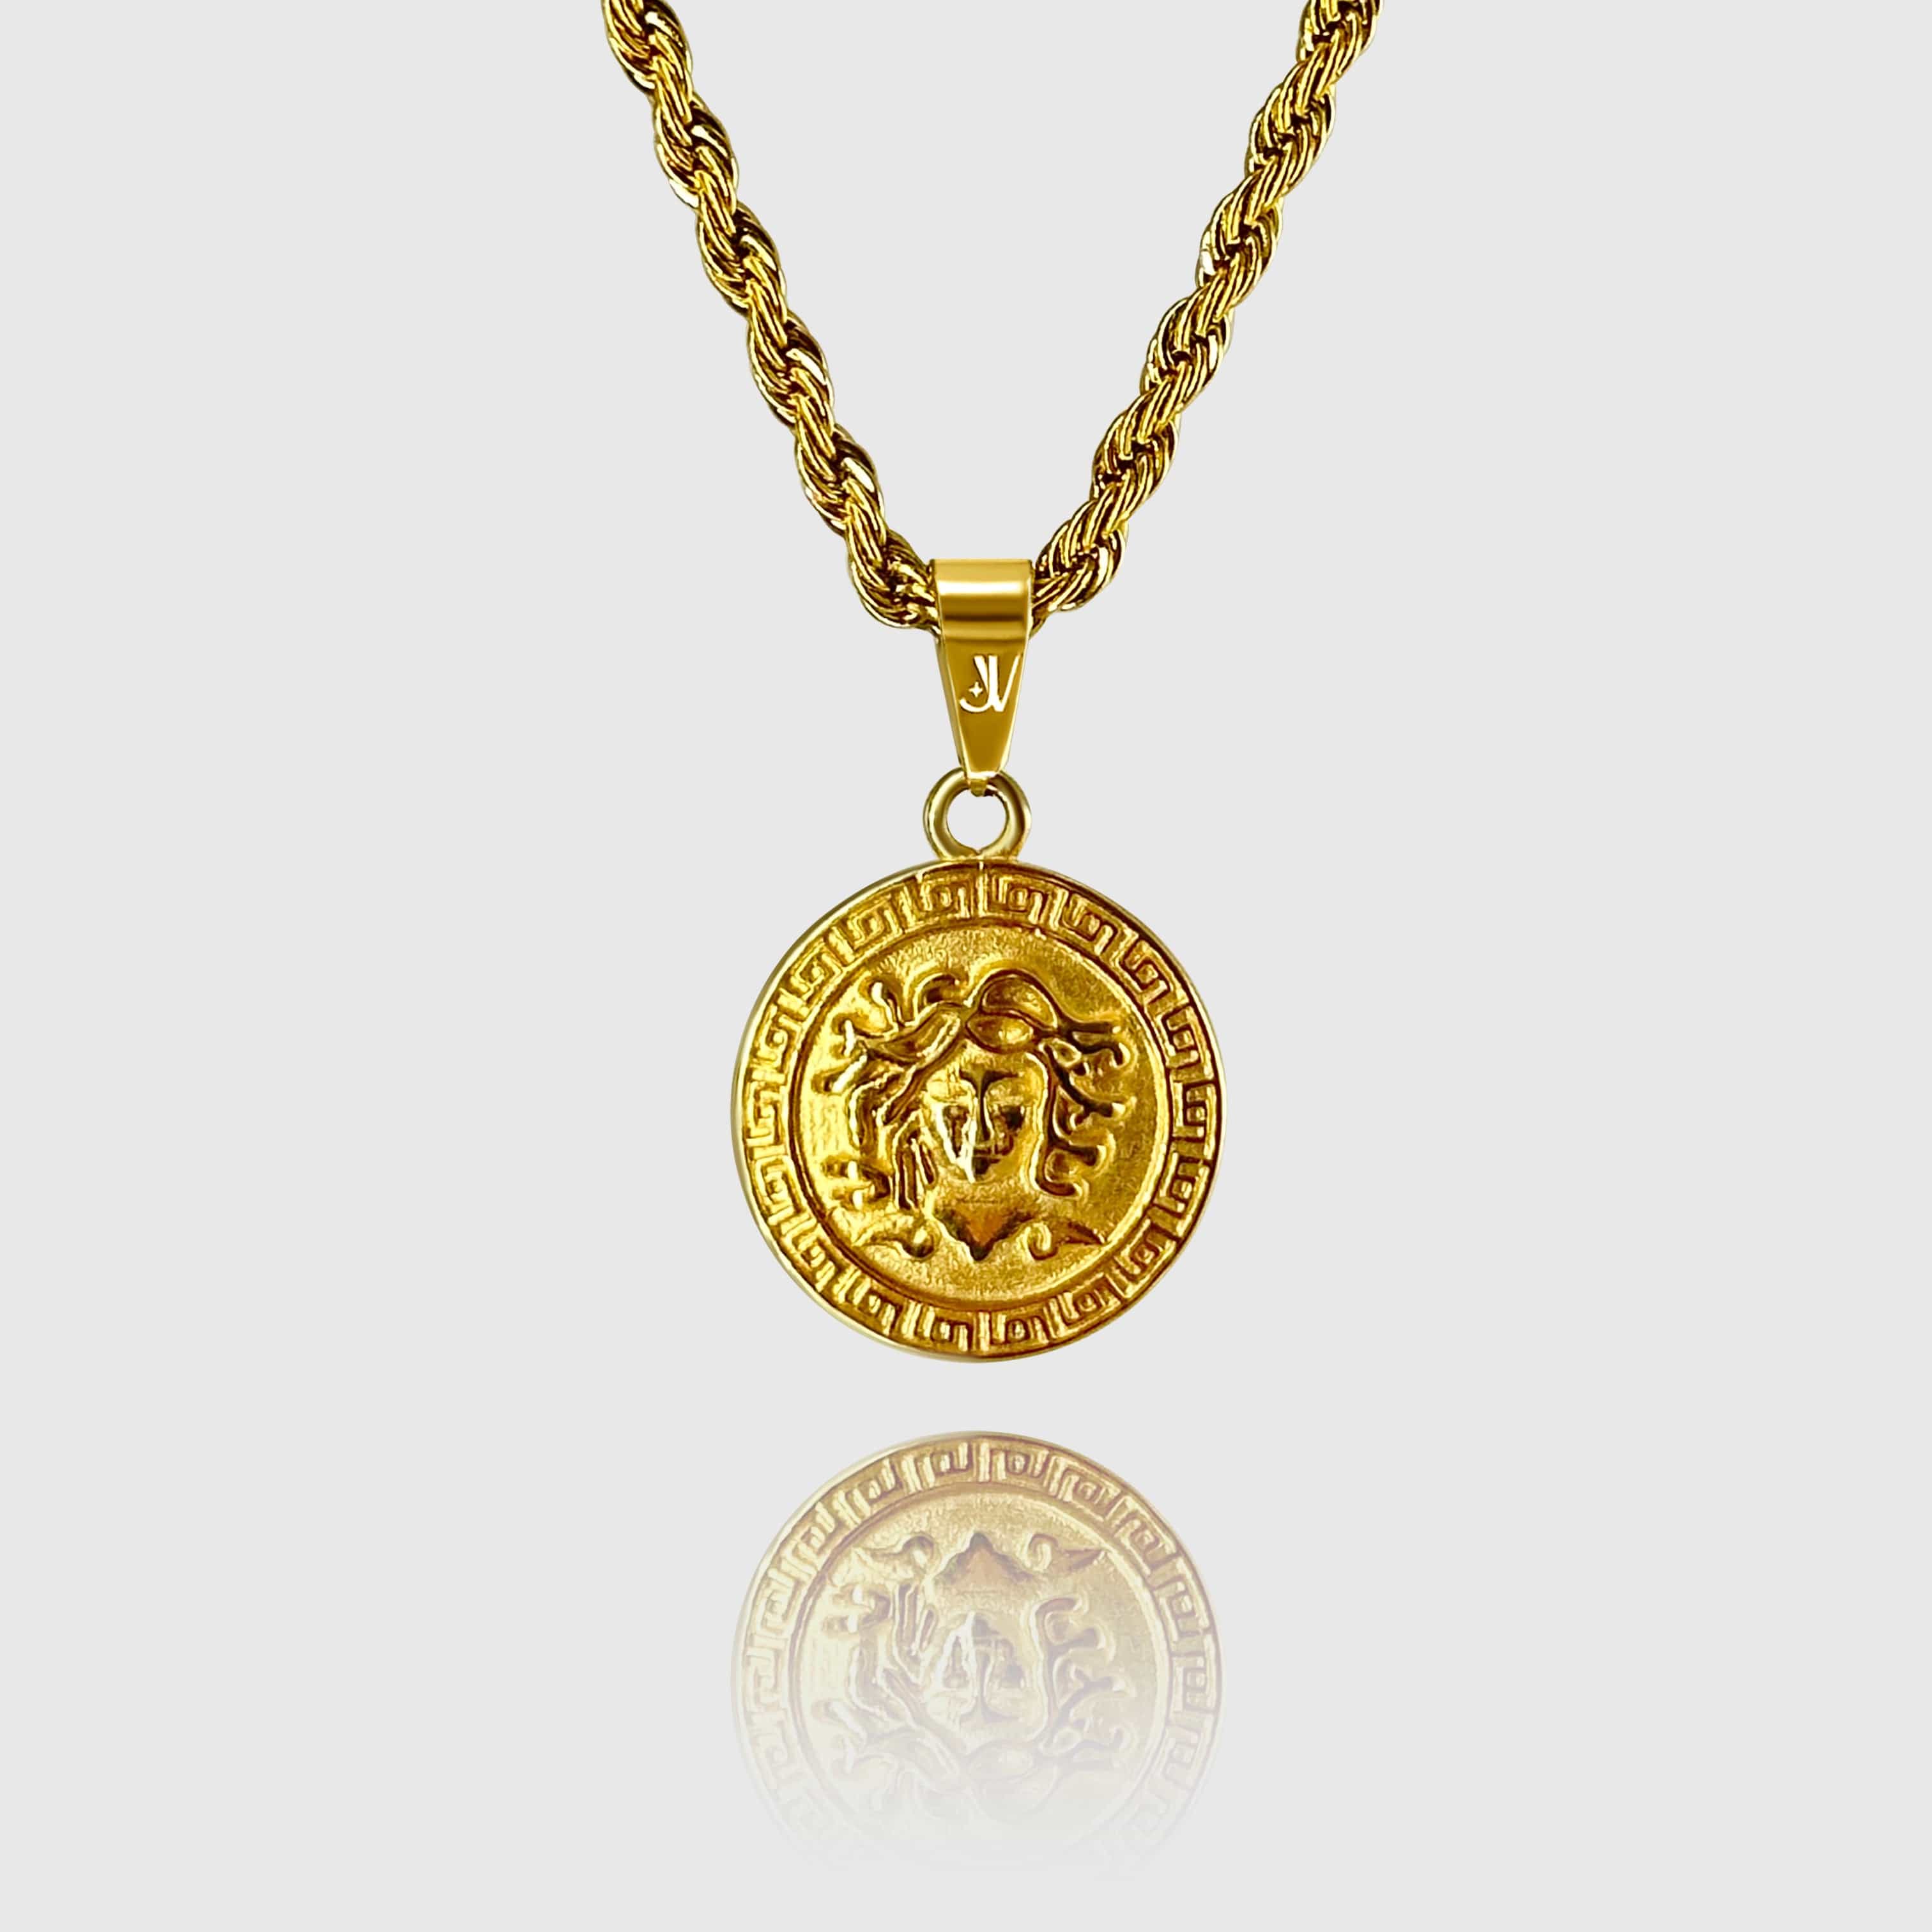 JVILLION Chain with Pendant Medusa Twisted-Rope Chain - Gold (3mm)